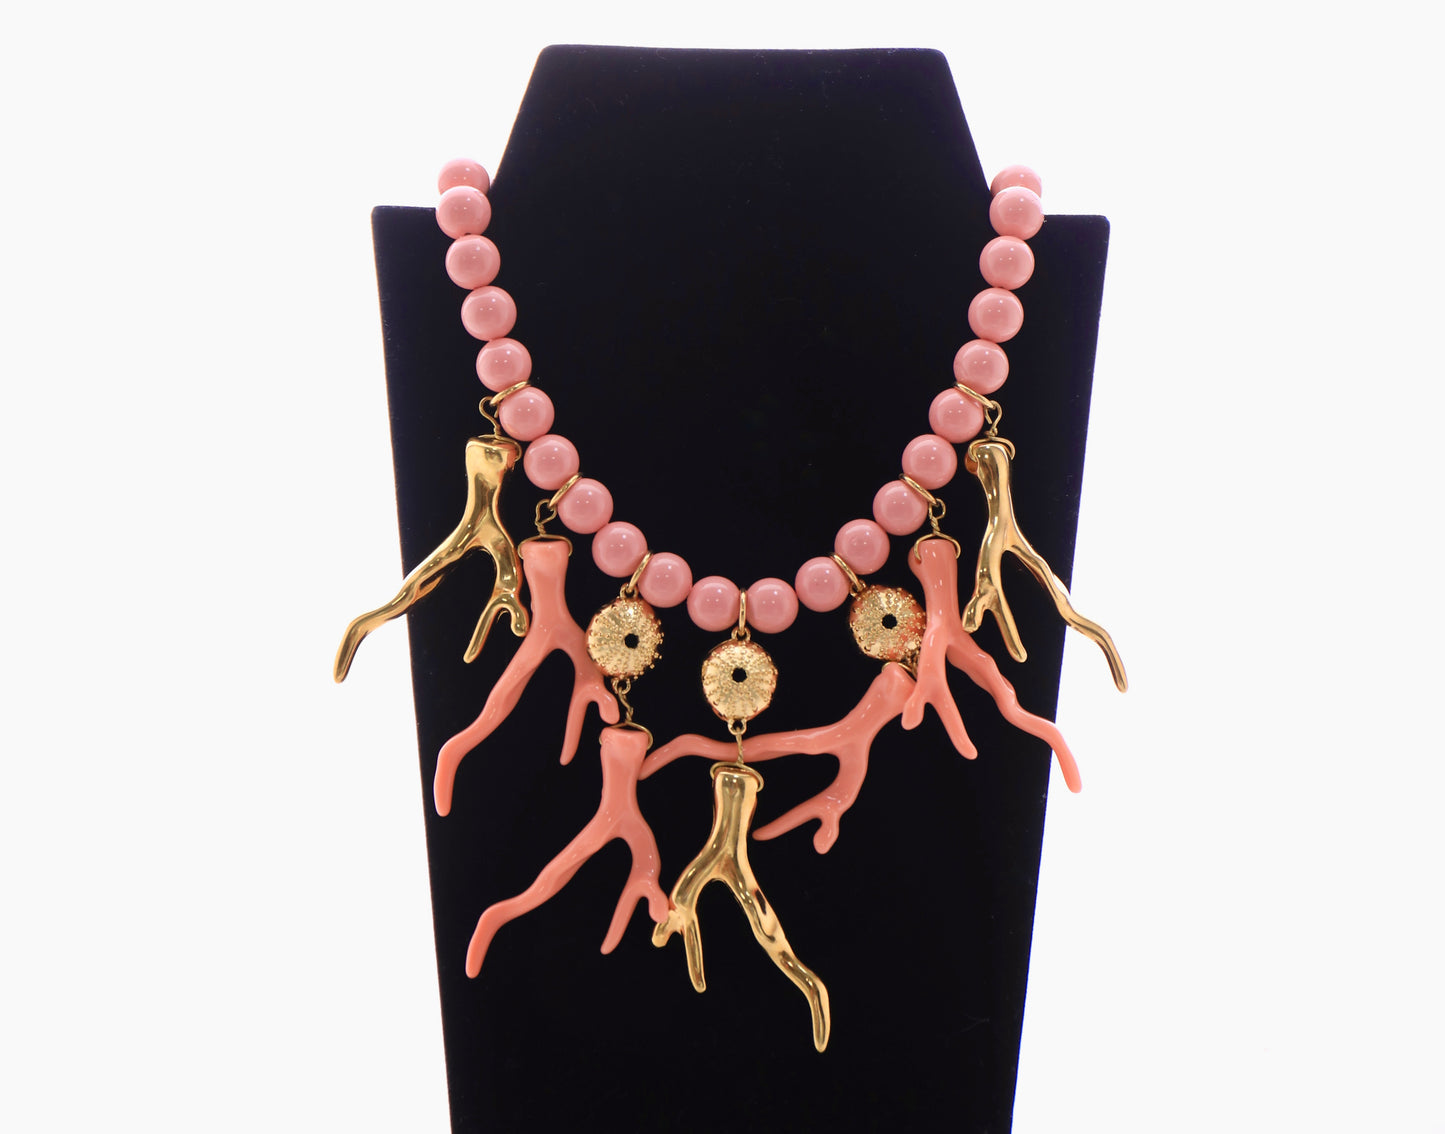 Coral and stone necklace